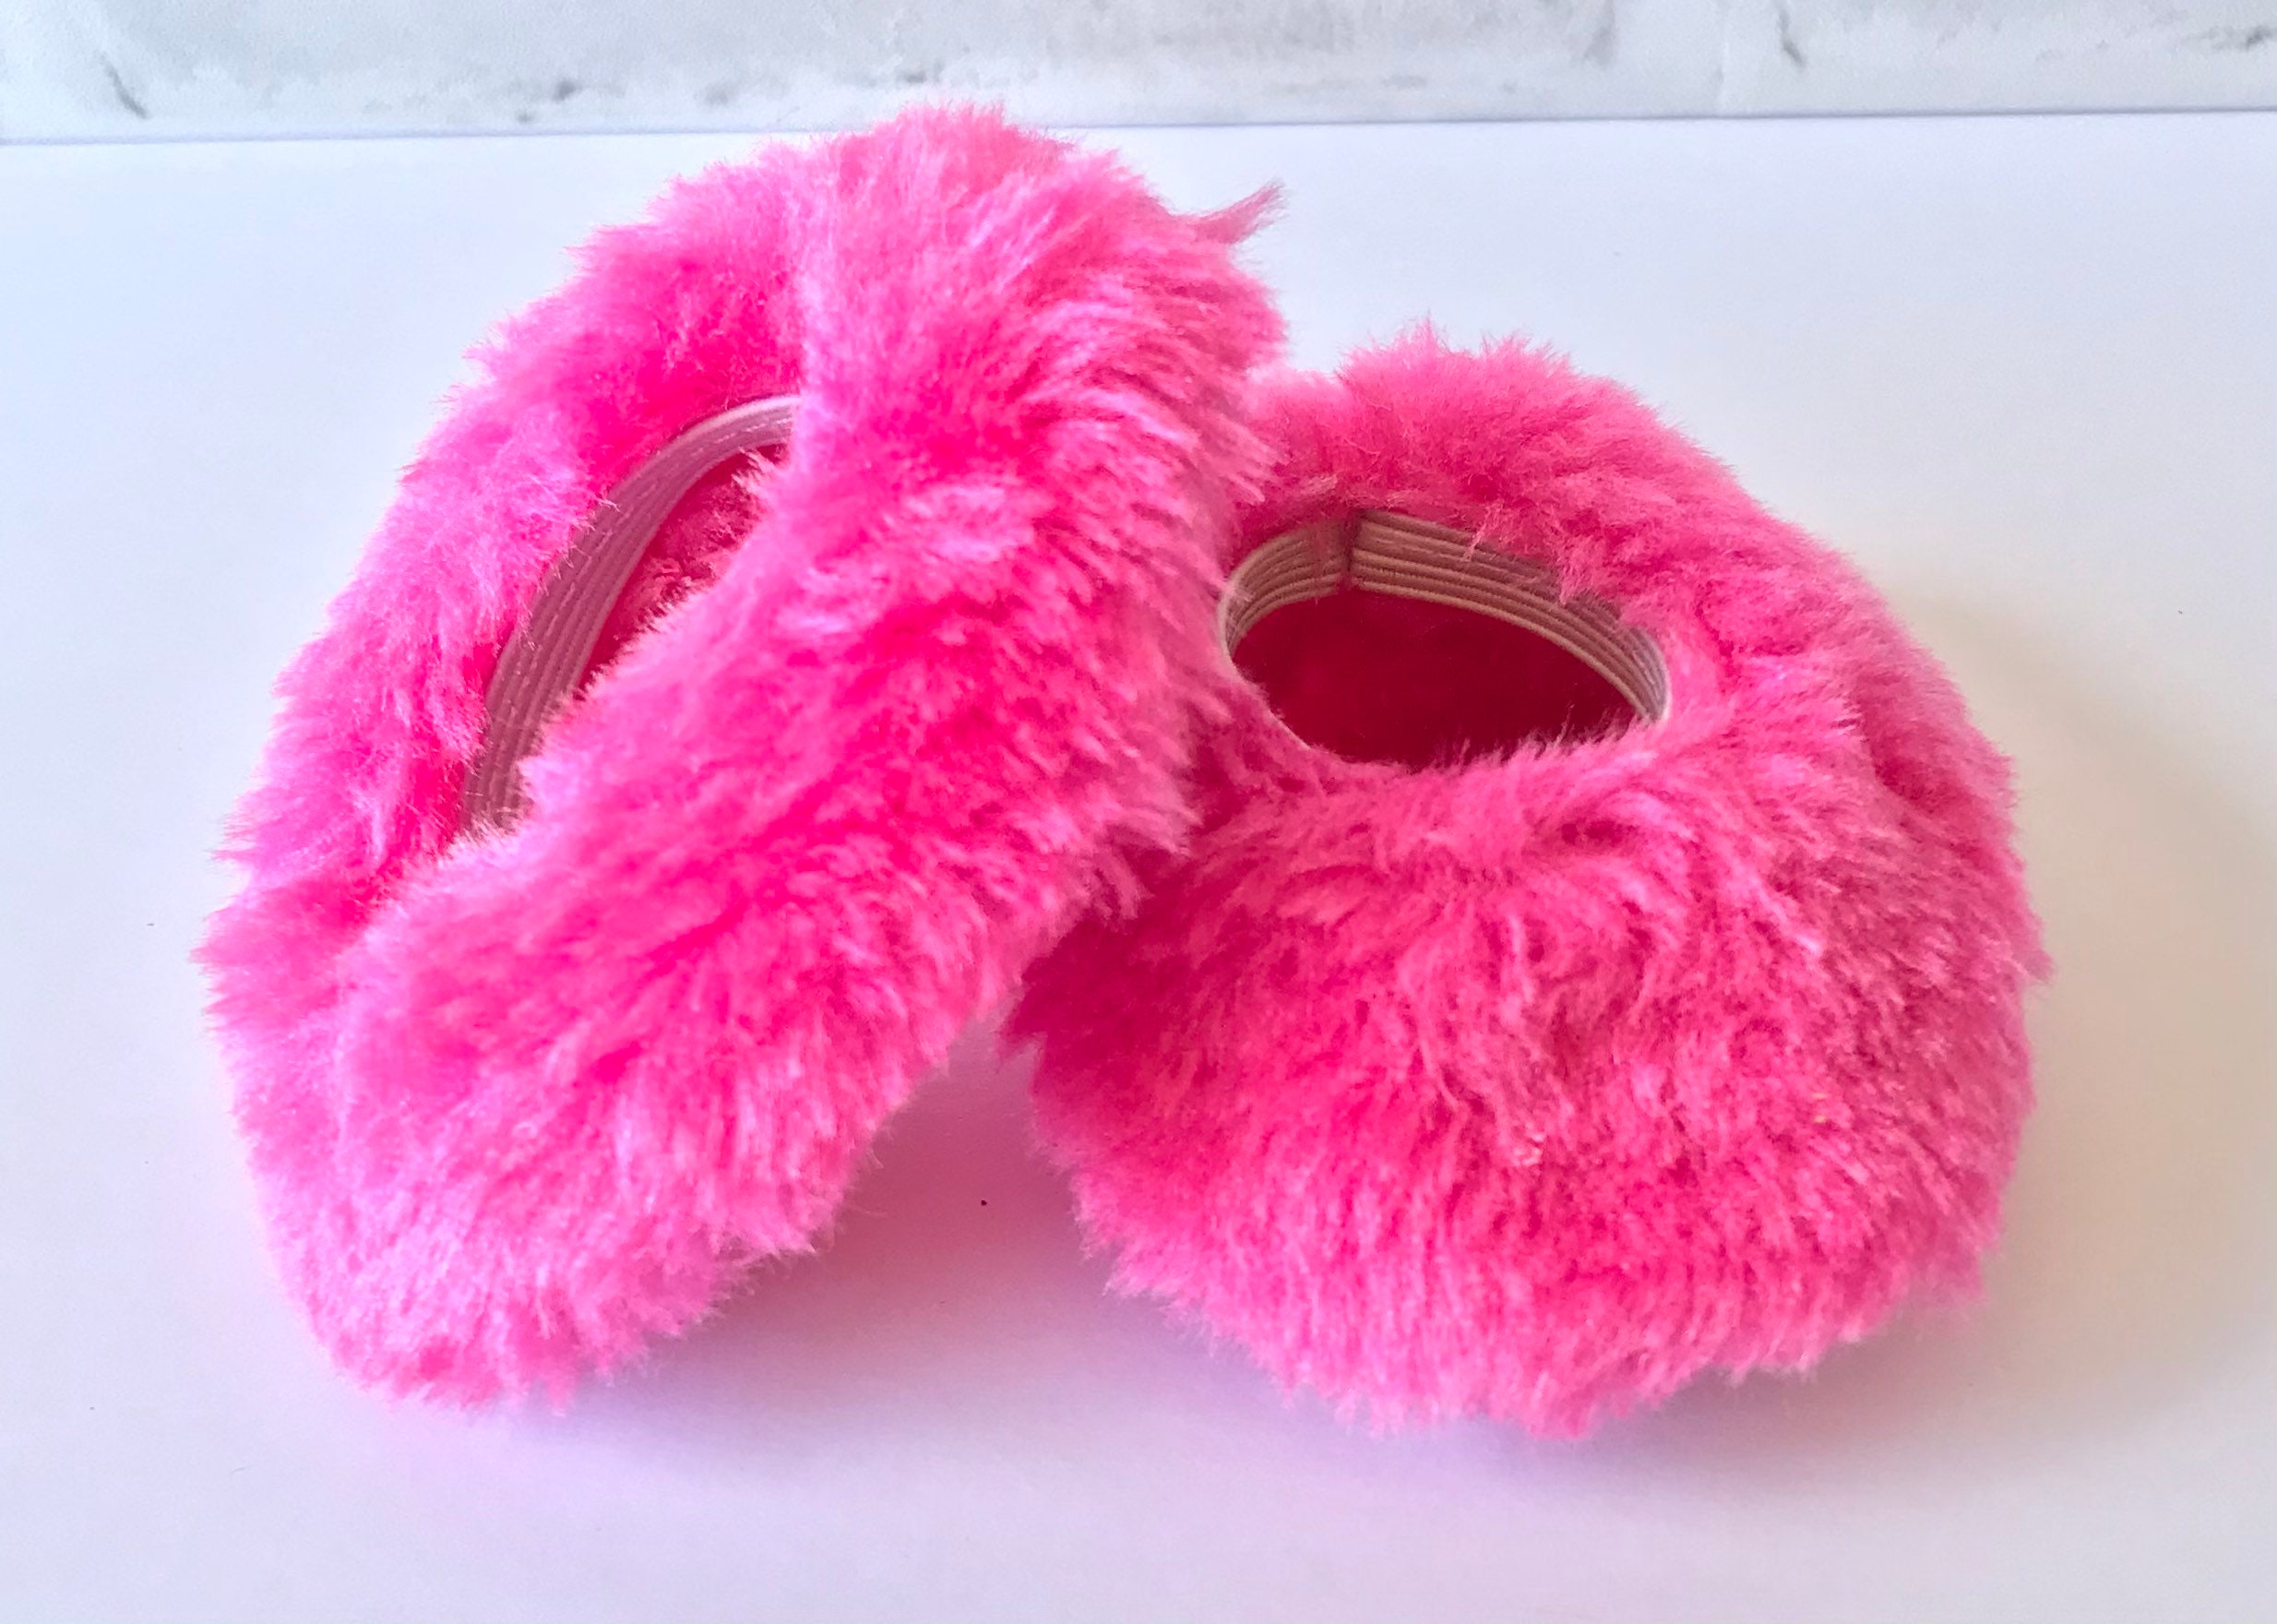 Fuzzy slipper Shoes-Hot Pink for Wellie Wishers Dolls